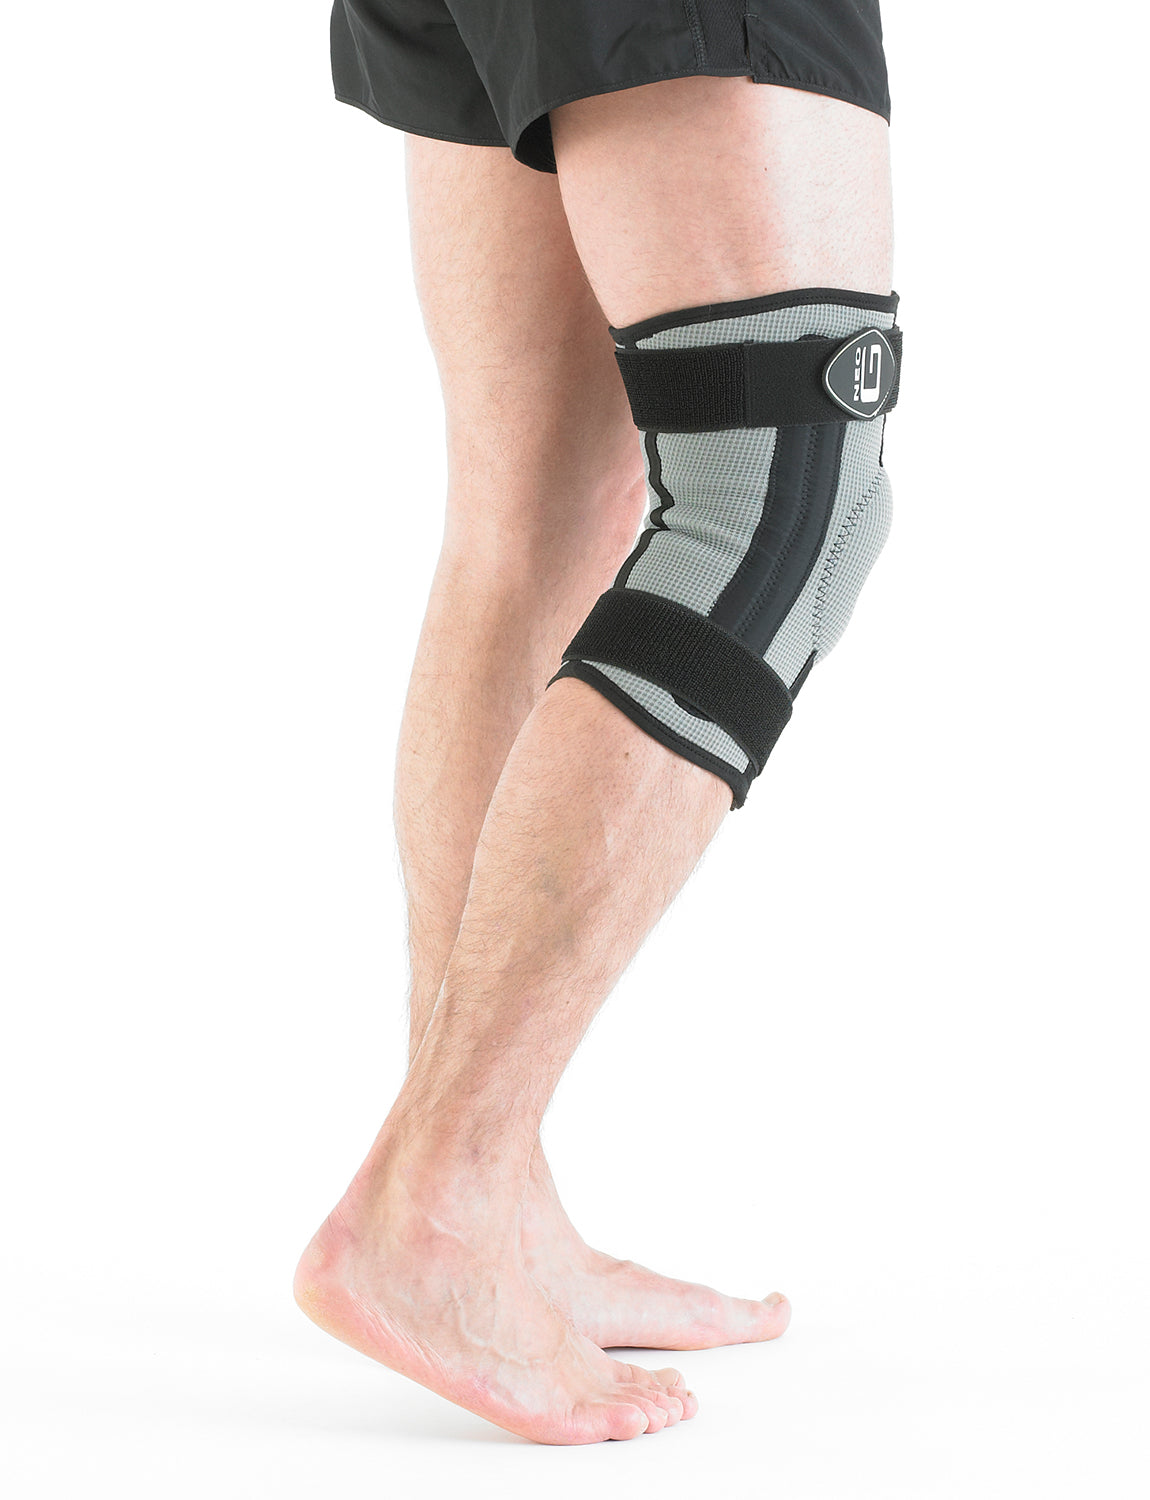 Buy Neo G Stabilized Open Knee Support - One Size, Athletic supports